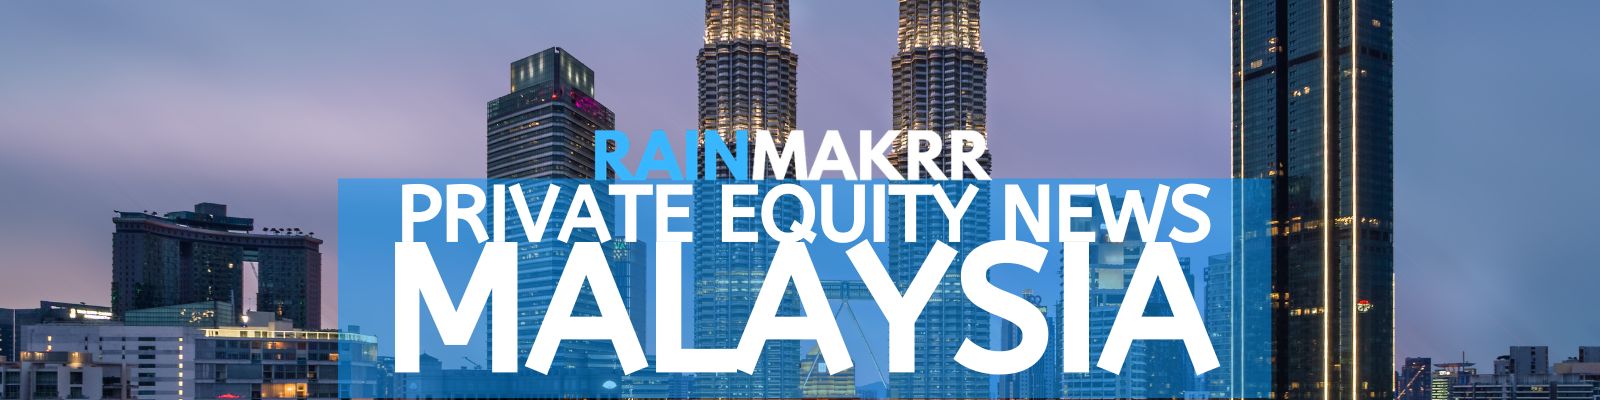 Top Private Equity Firms Malaysia DT